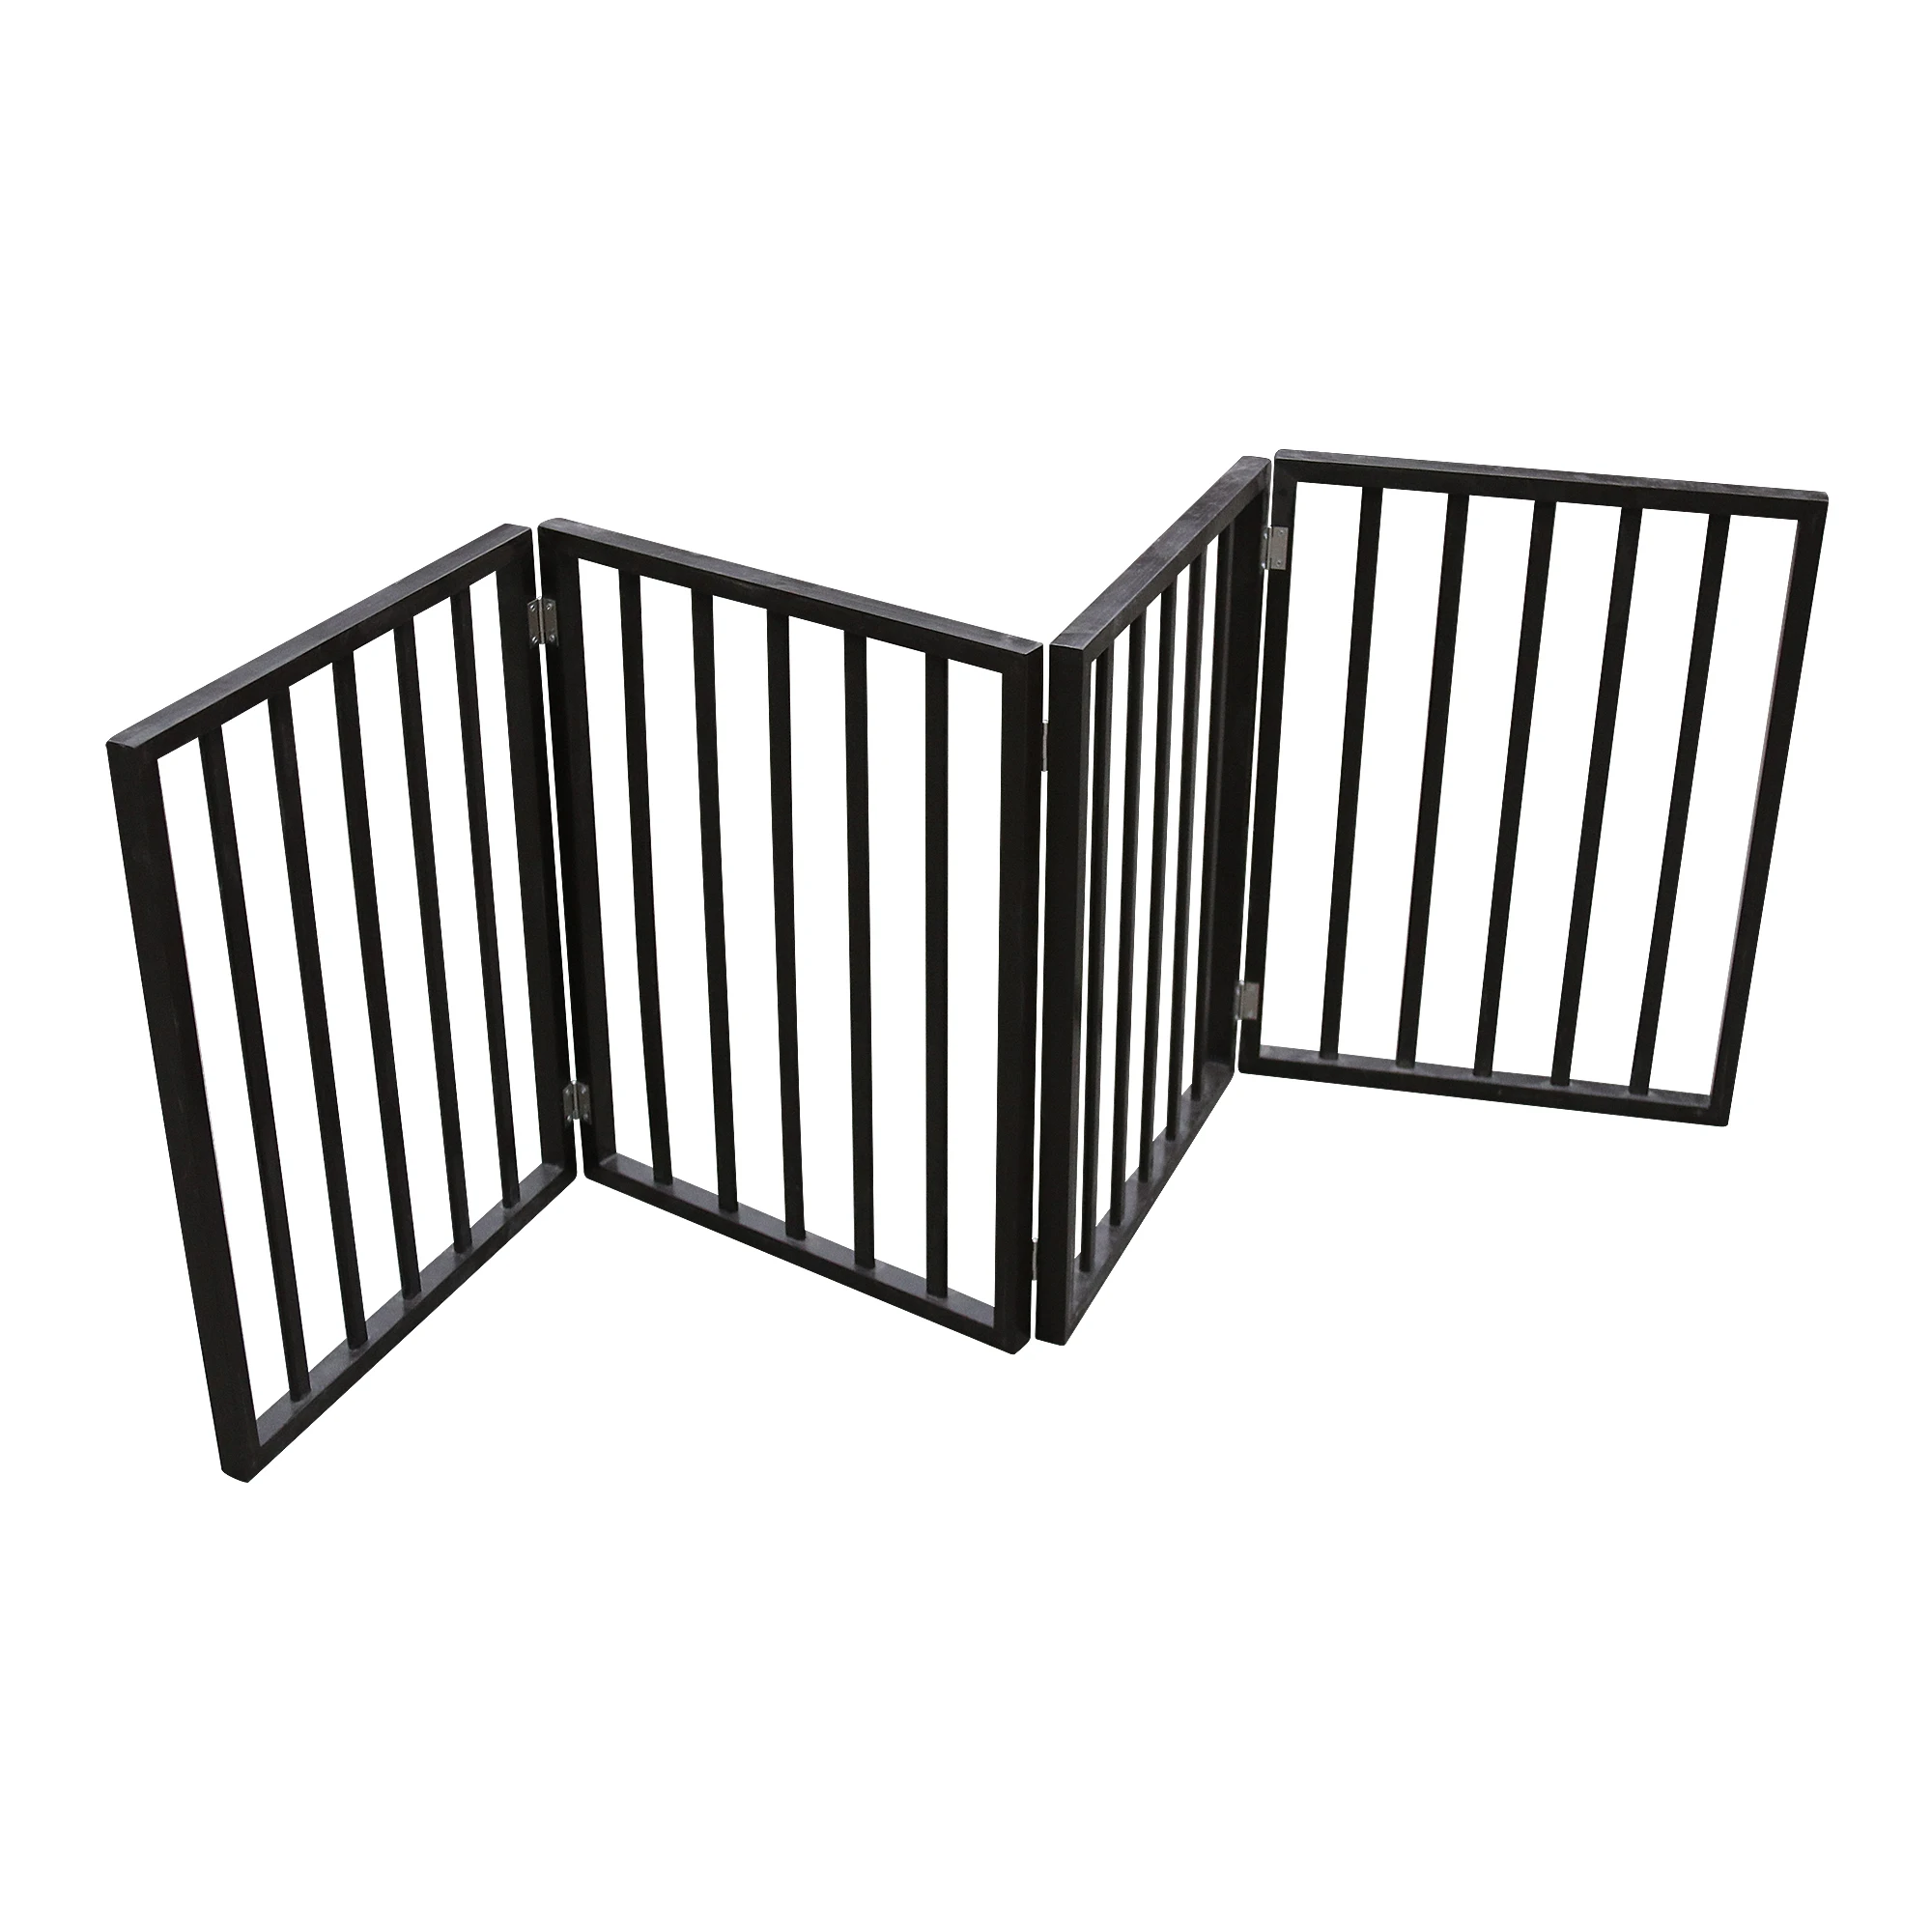 

Free Shipping Drop Shipping Spot Outdoor Folding Retractable Expandable Barrier Z Shape Freestanding Pet Fence Dog Gate, Dark brown